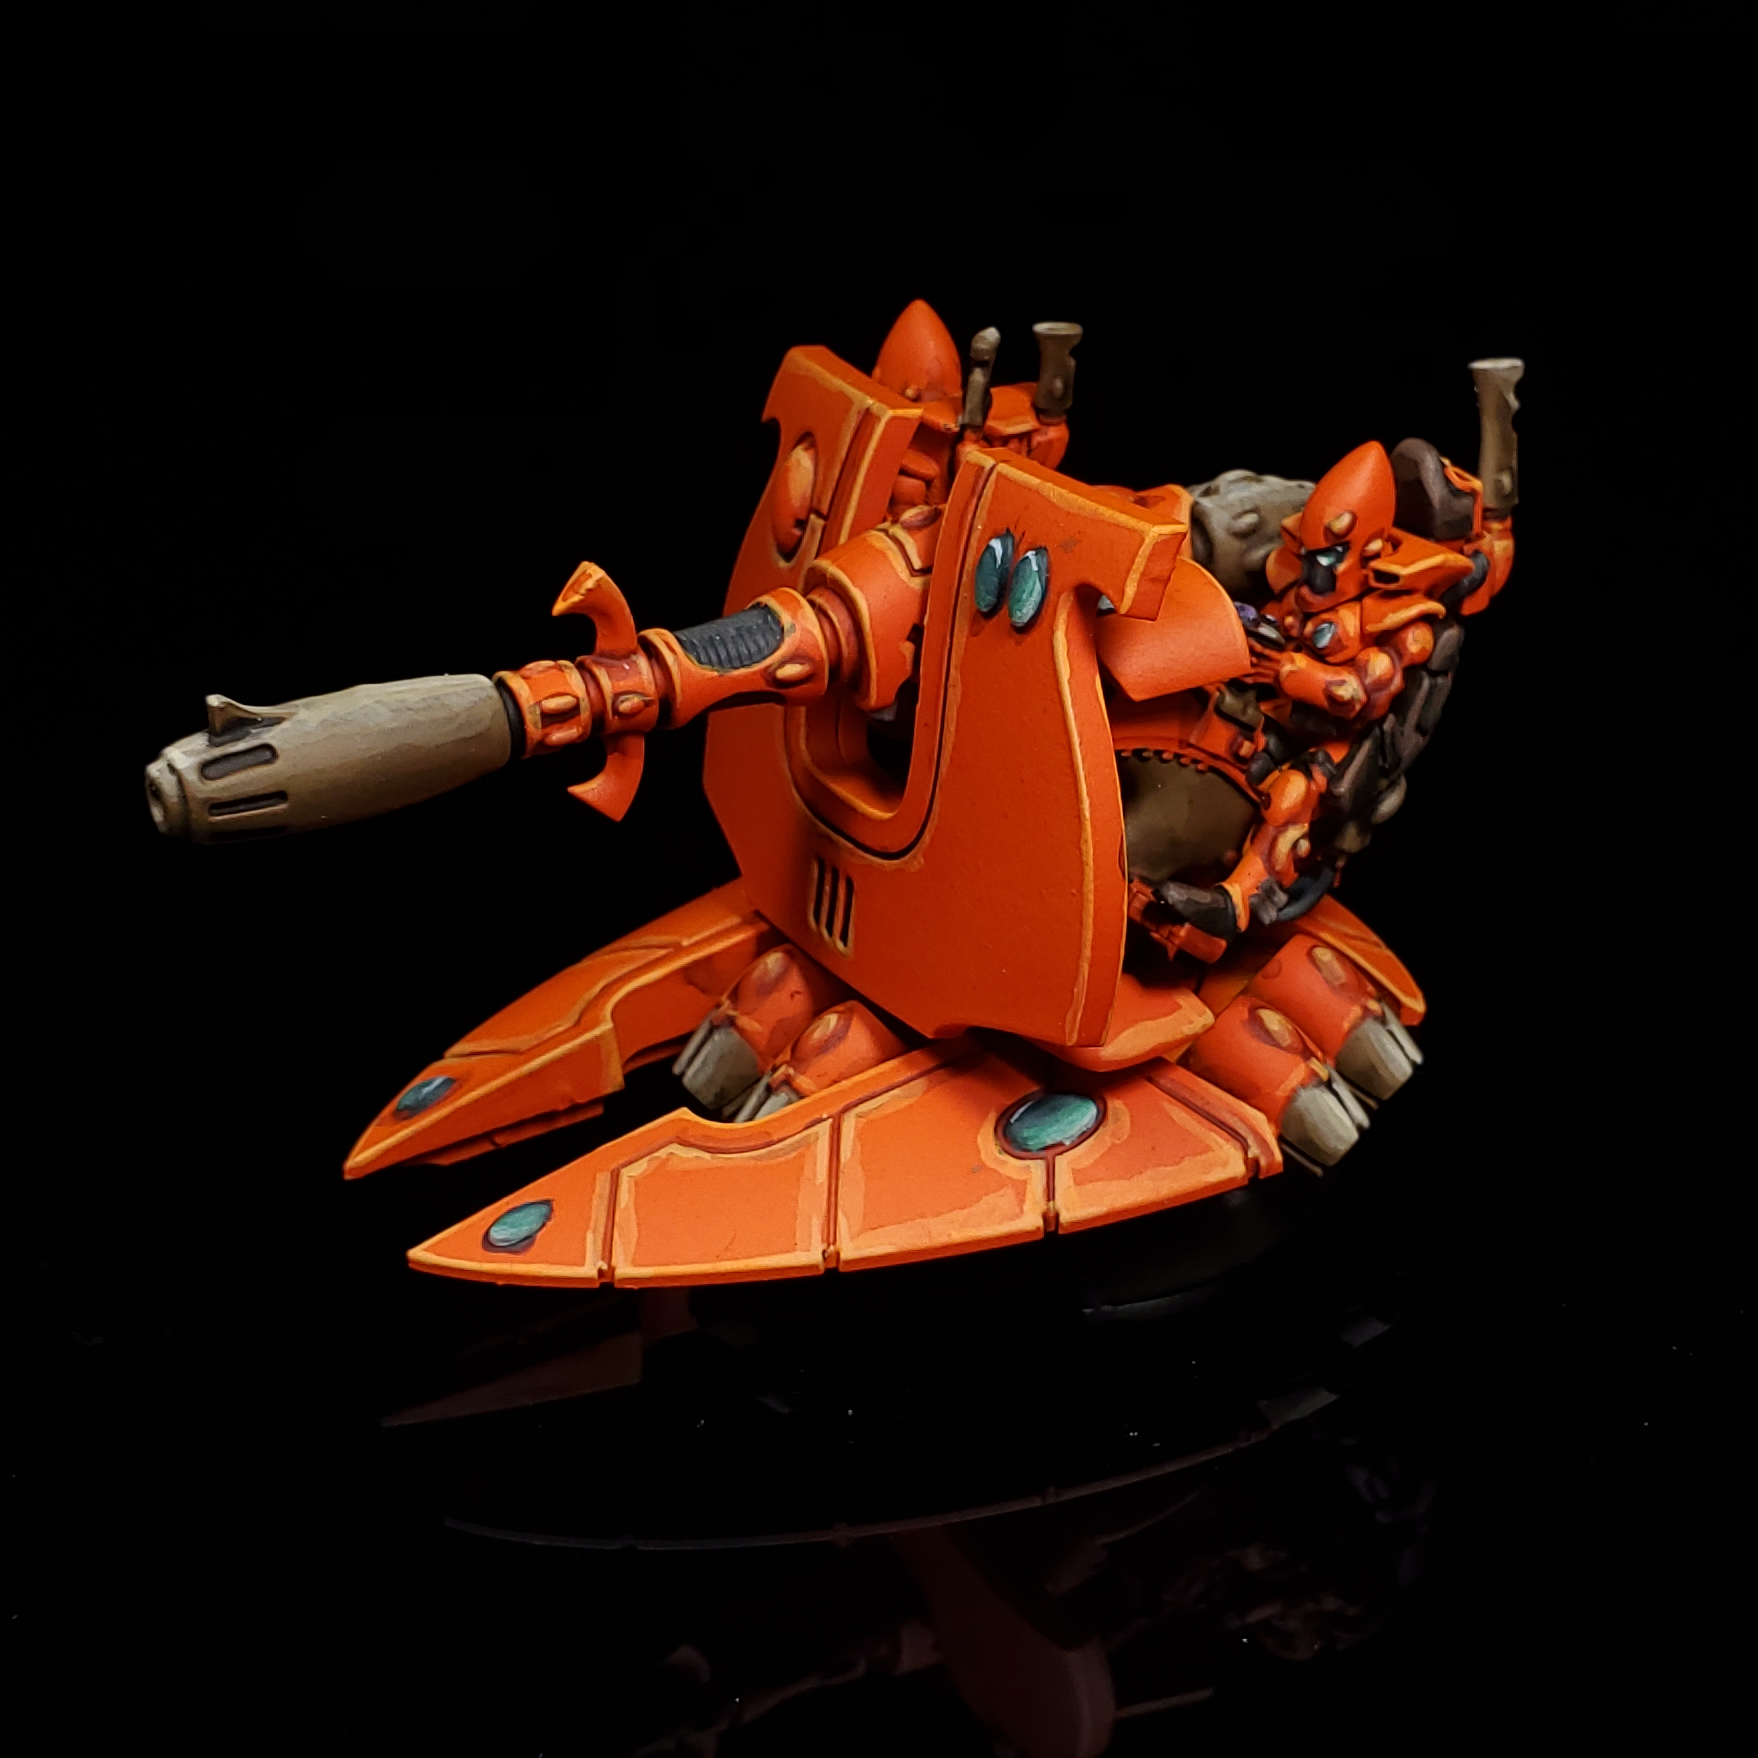 Eldar Support Weapon - D-Cannon. Credit: Rockfish